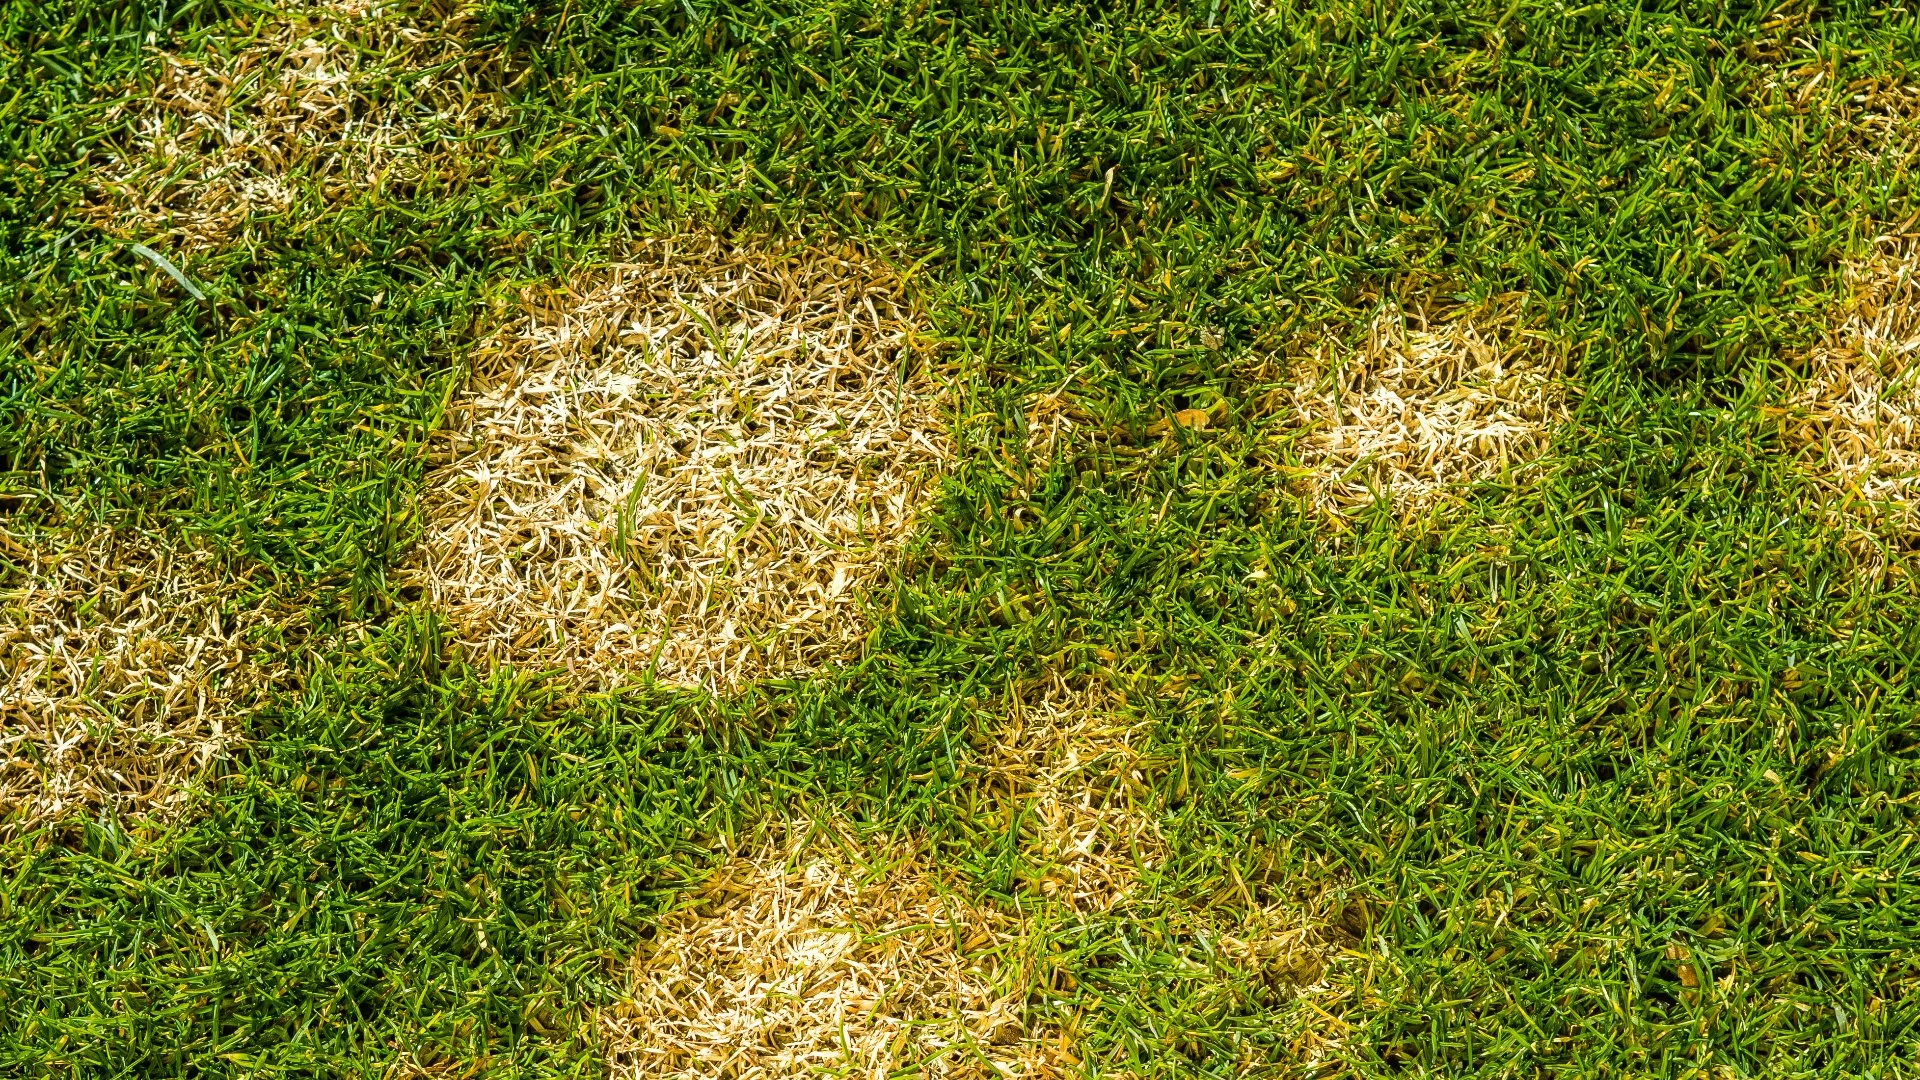 What Should You Do if You Suspect That Brown Patch Has Infected Your Lawn?